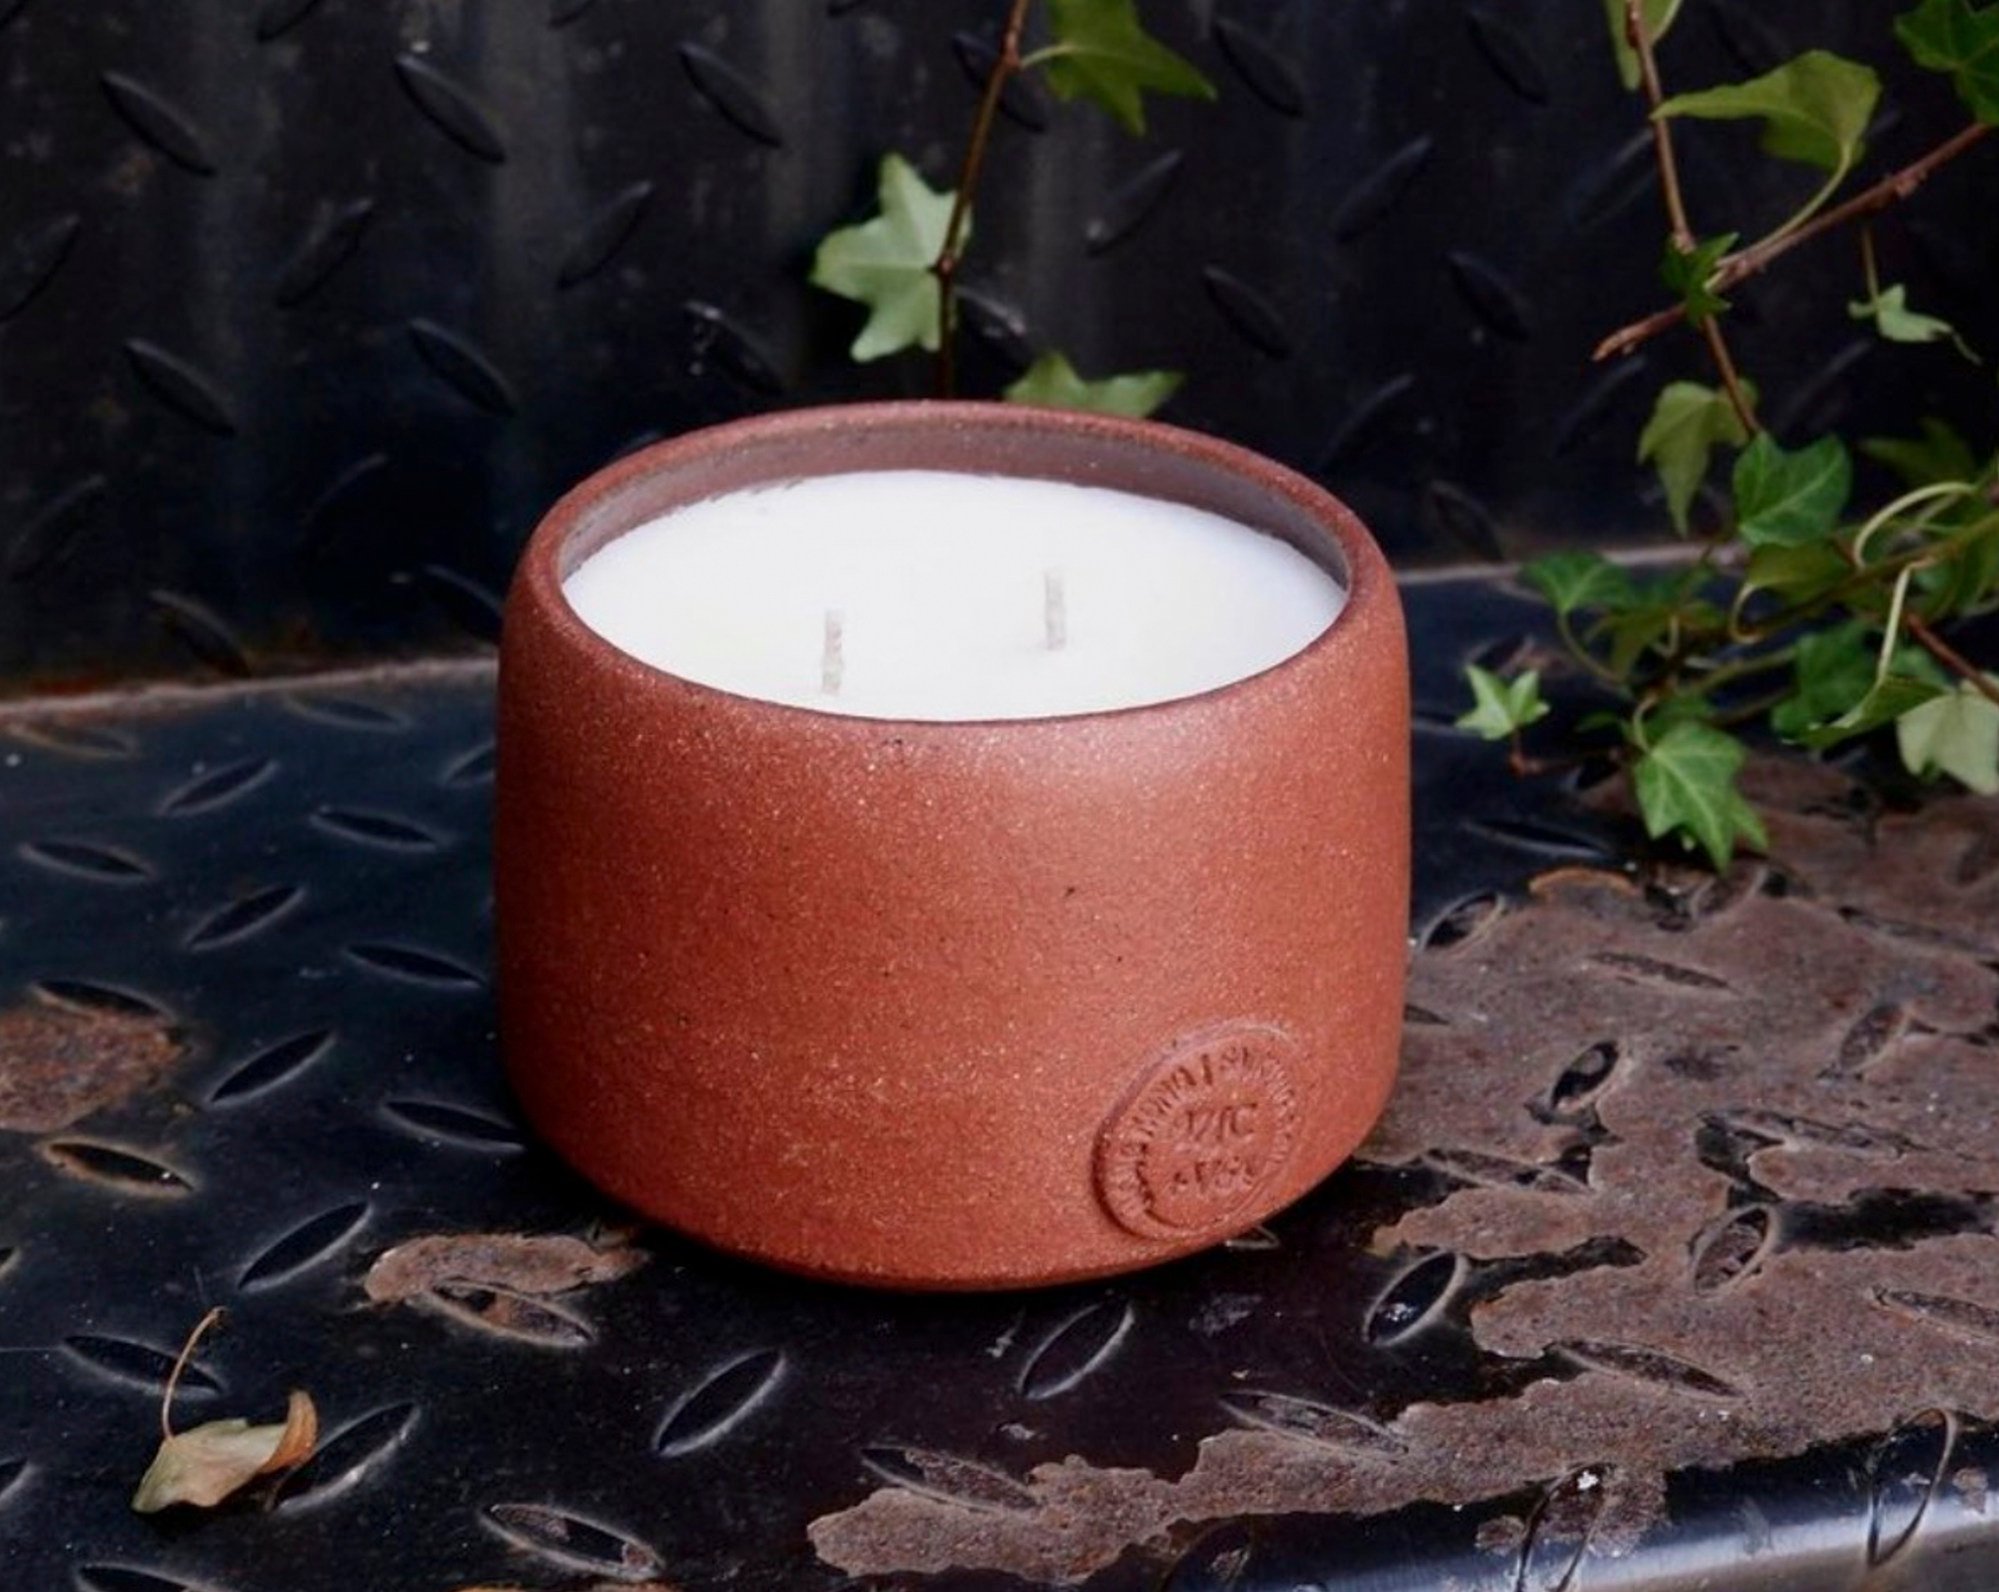 One of the 200 candles in terracotta-style pots produced for the Our Land project, a collaboration between BeCandle, designer Niko Leung and potter Candy Law. Photo: courtesy Instagram/@becandle_saikung